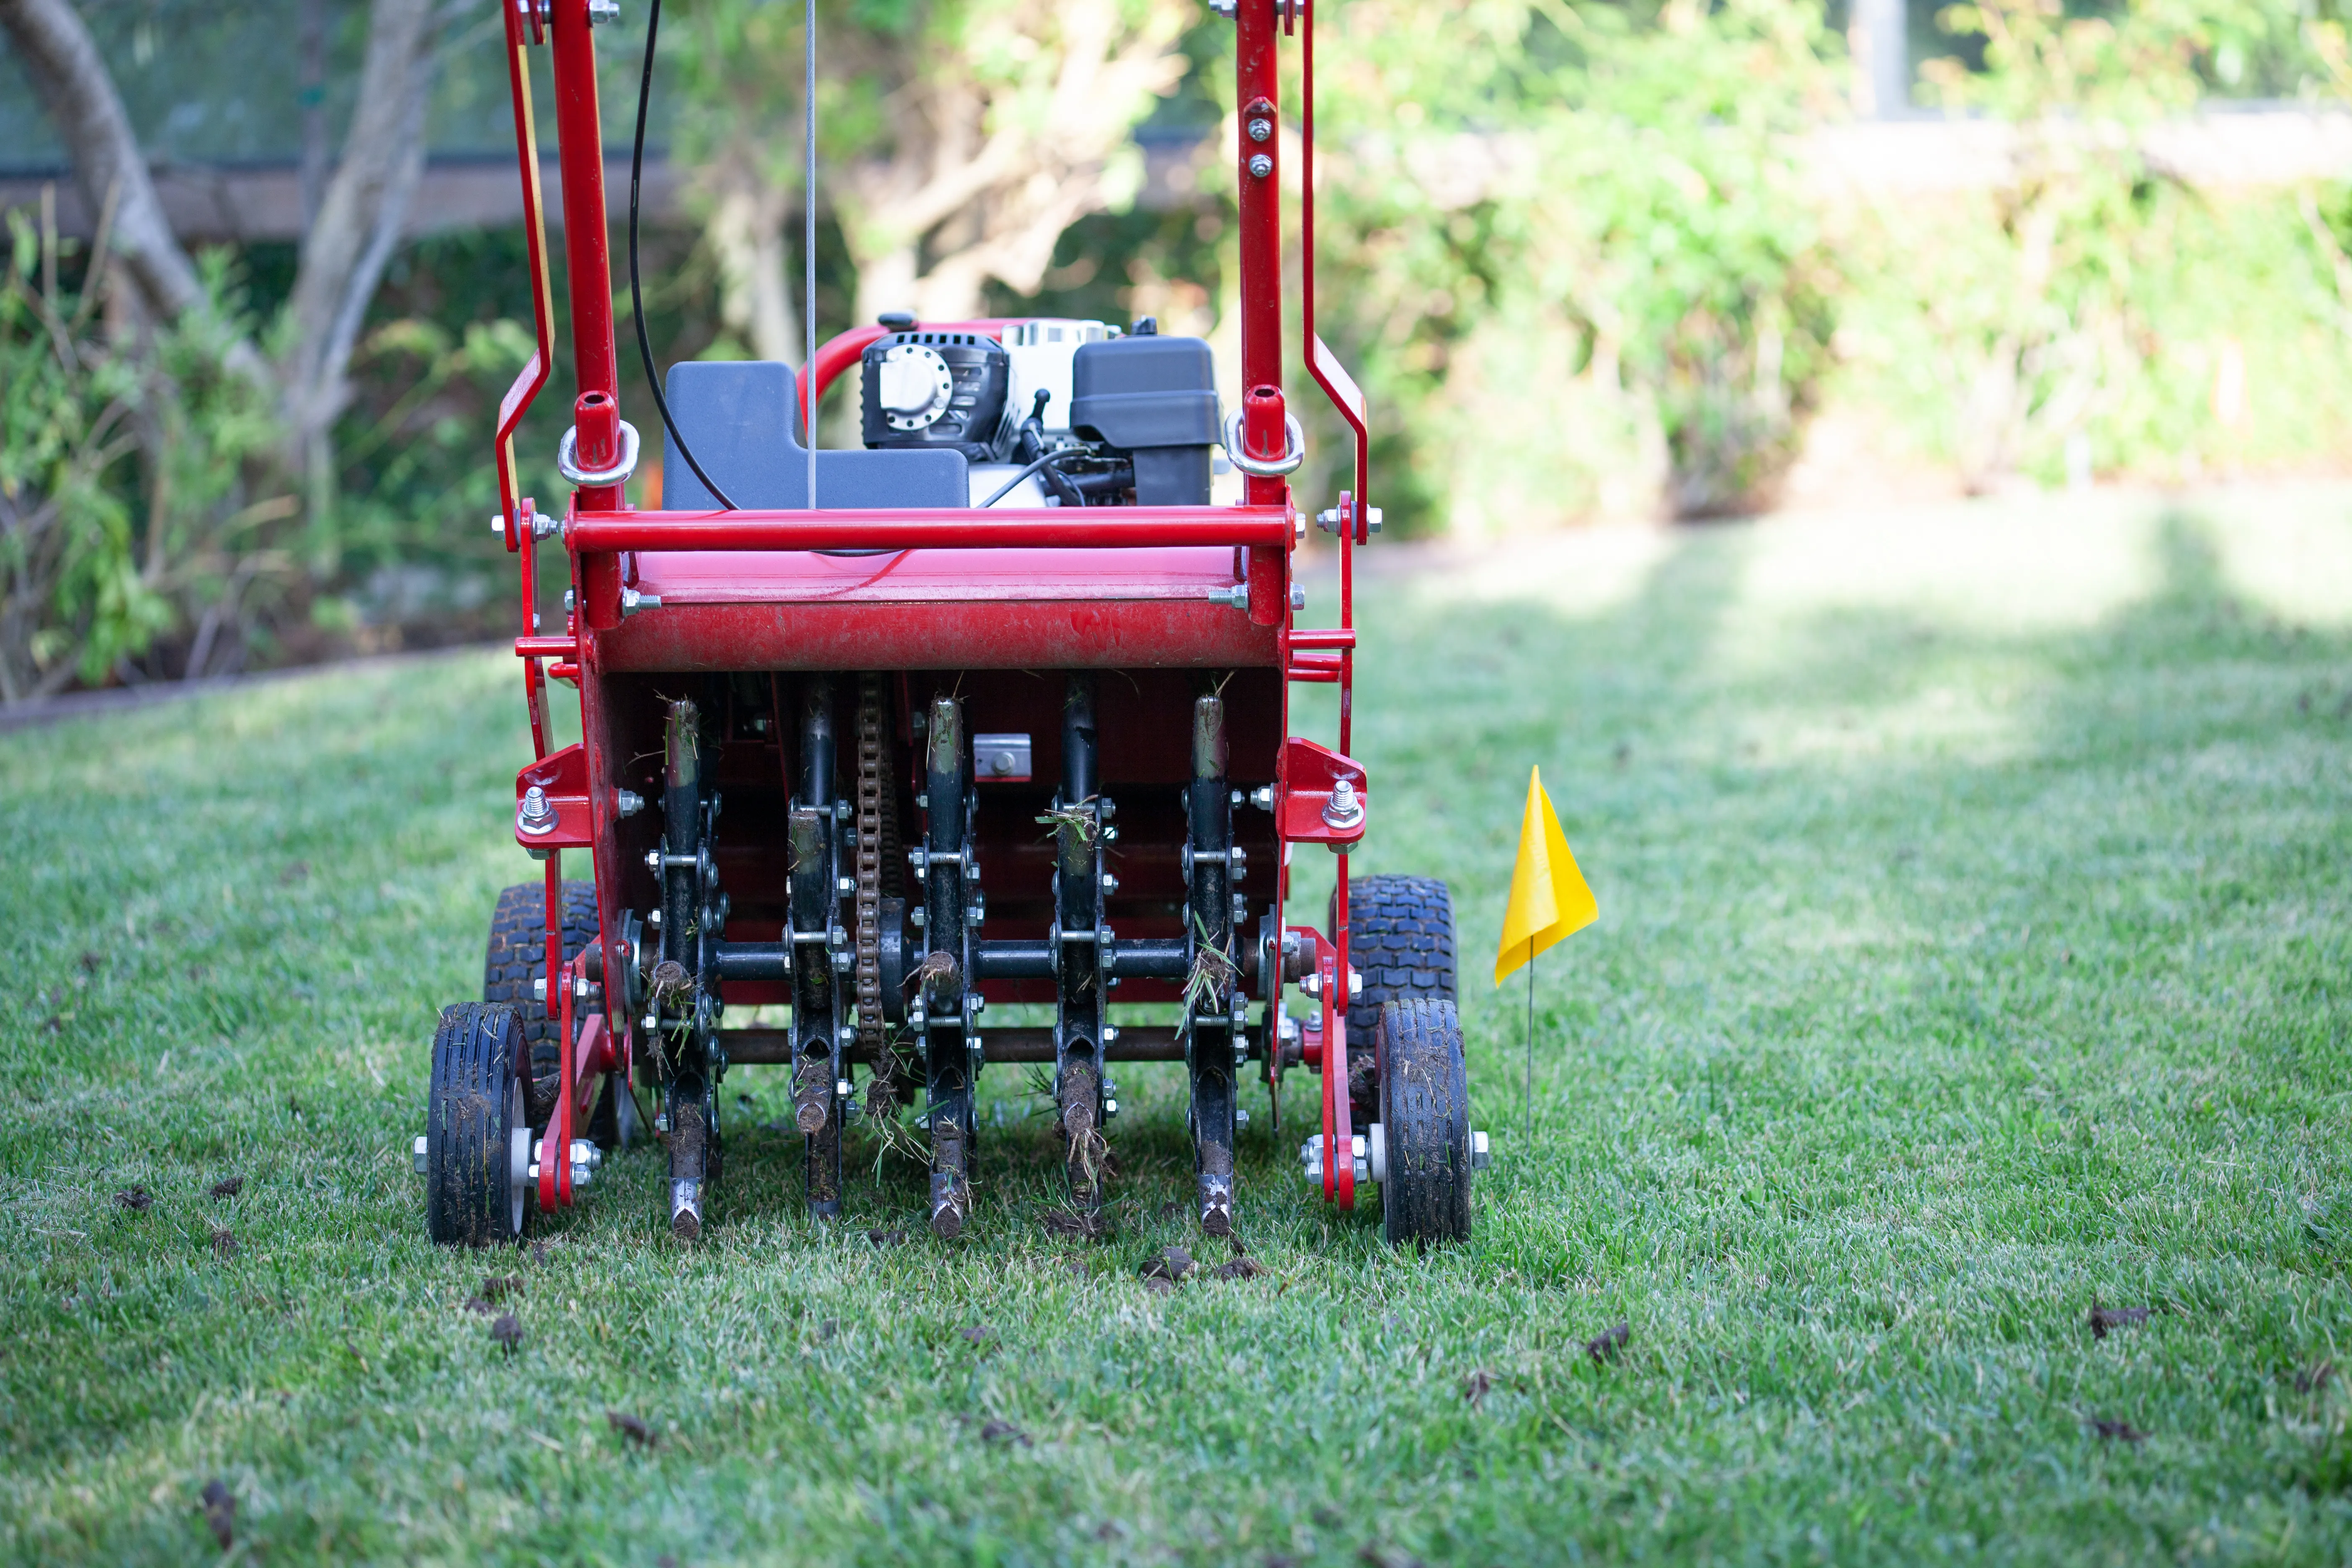 Lawn Aeration is a service we offer that helps improve the health of your lawn. By removing small plugs of soil from the ground, it allows air, water and nutrients to reach the grass's roots. This service can help reduce problems like Brown Patch Disease and improve your lawn's overall appearance. for Ovidio's Landscaping in Westchester County, NY